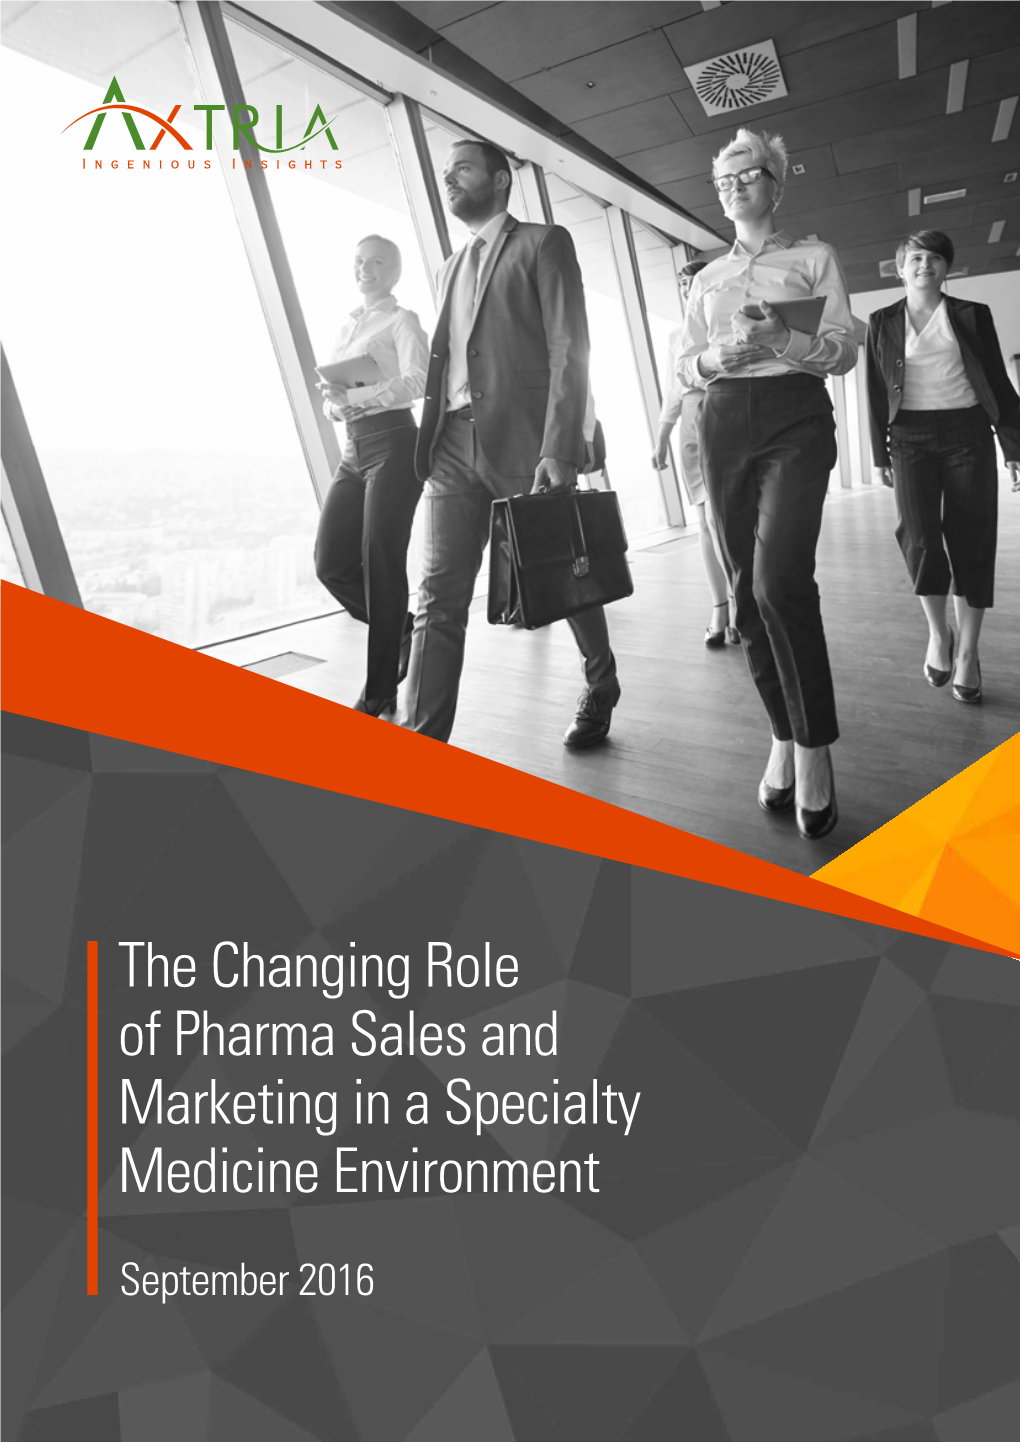 The Changing Role of Pharma Sales and Marketing in a Specialty Medicine Environment